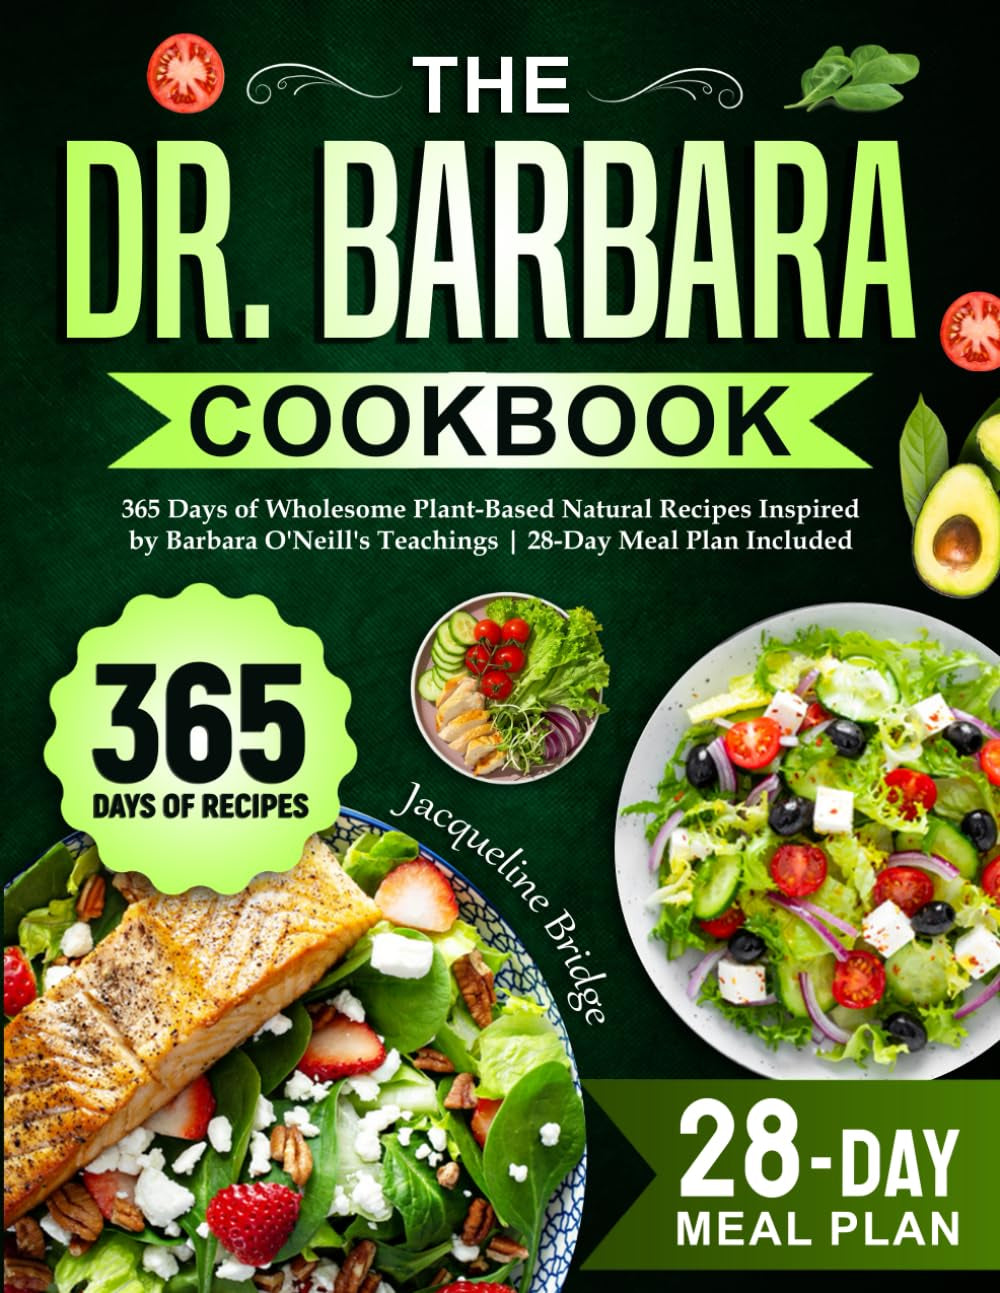 The Dr. Barbara Cookbook: 365 Days of Wholesome Plant-Based Natural Recipes Inspired by Barbara O'Neill'S Teachings | 28-Day Meal Plan Included